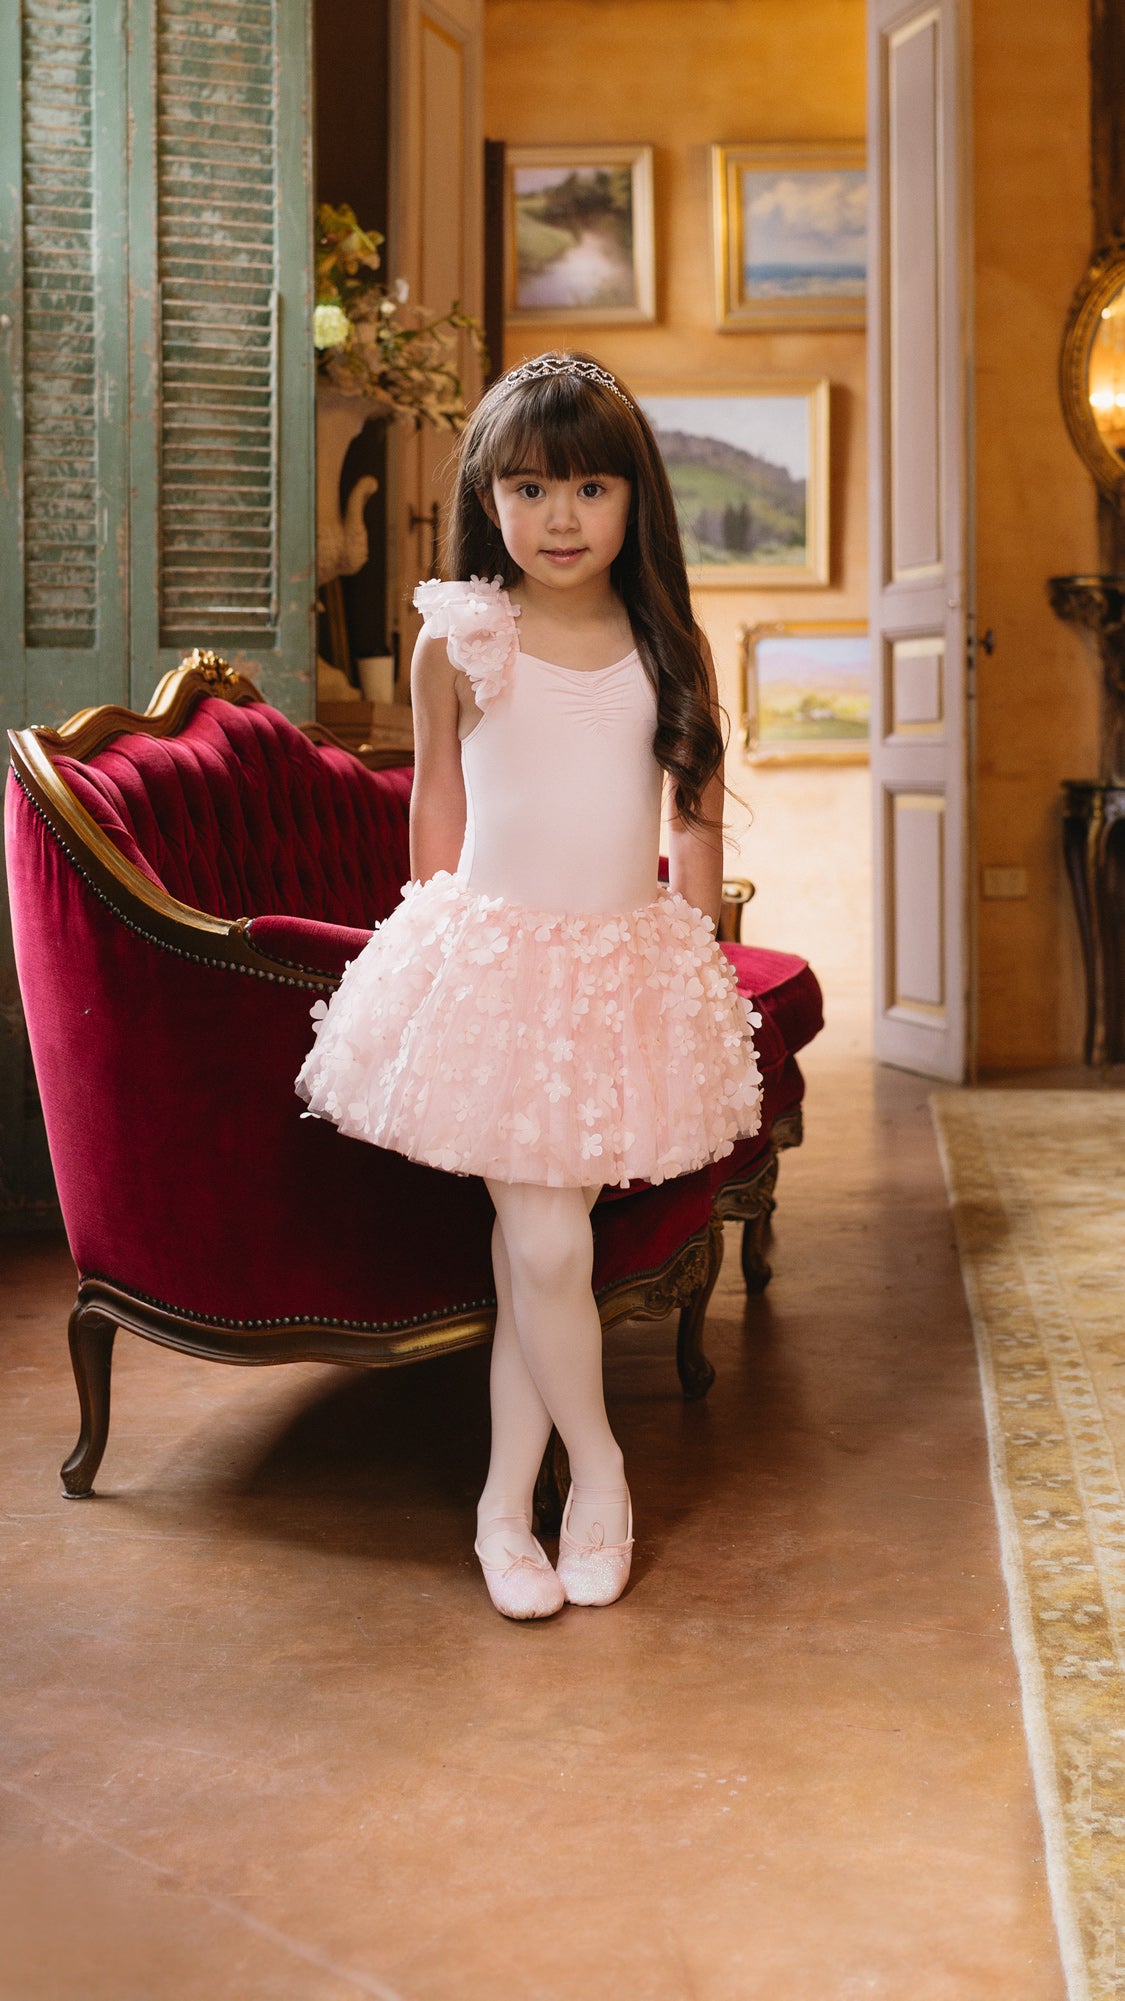 Flo Dancewear - Tuesdays are for tutus, tights and tippy-toes